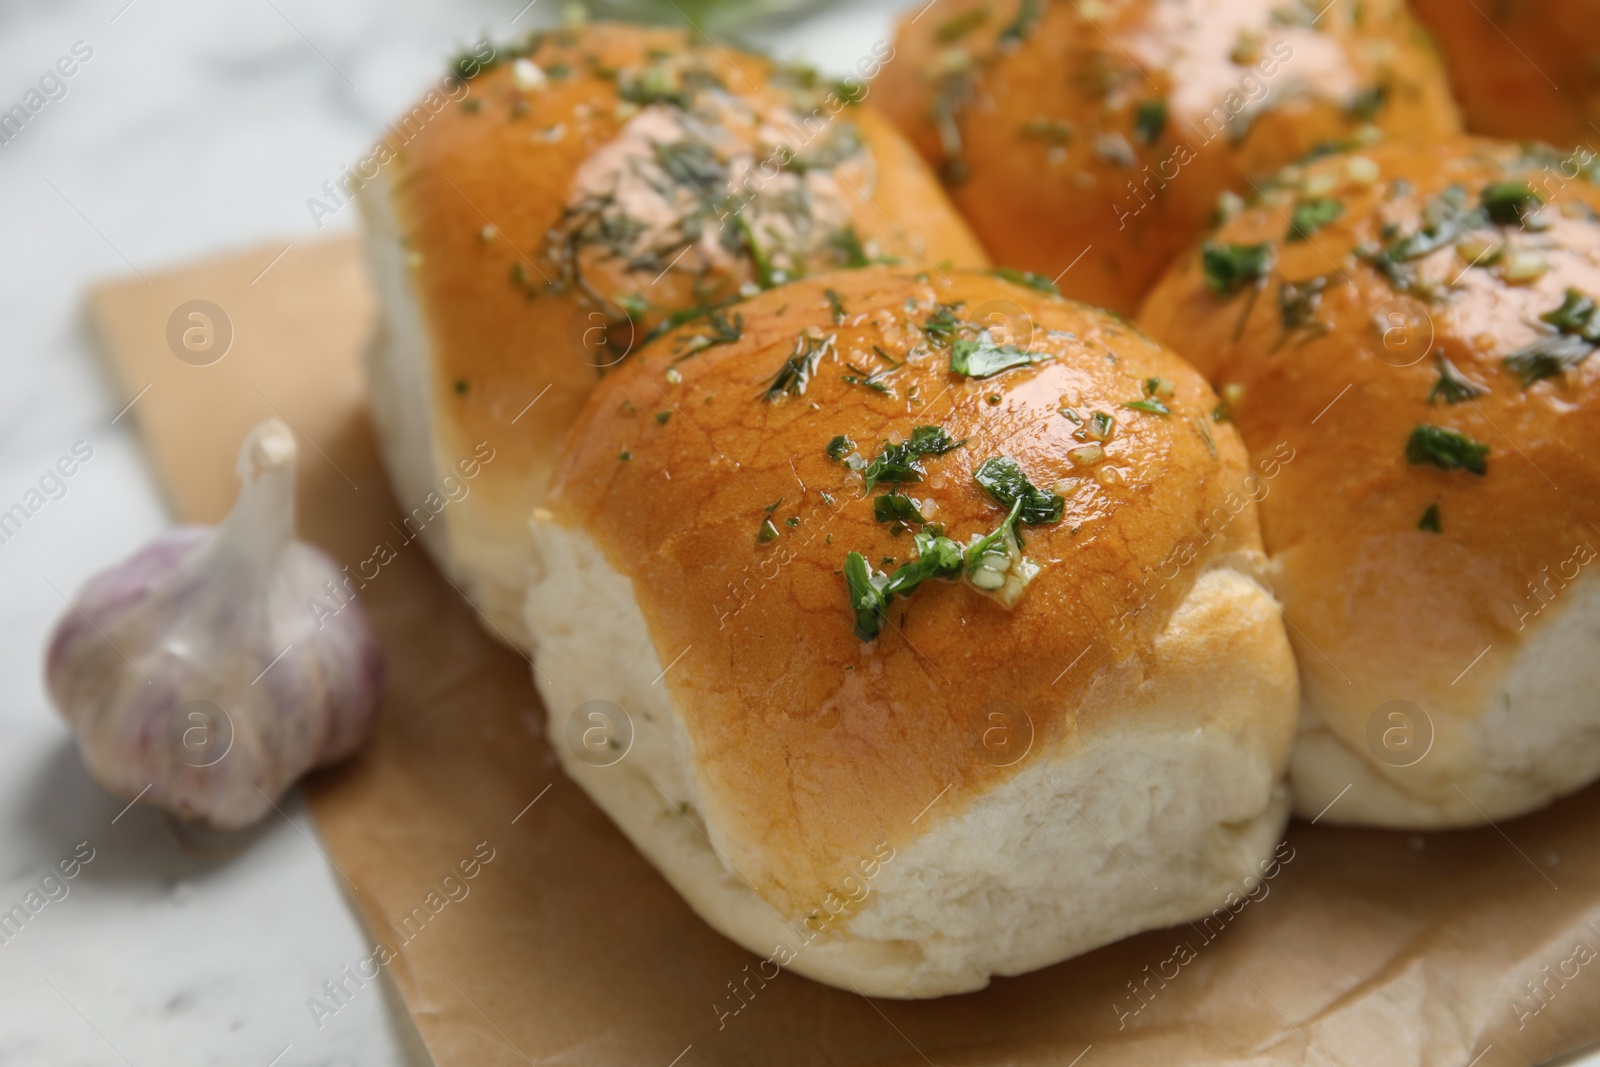 Photo of Traditional pampushka buns with garlic and herbs on white table, closeup